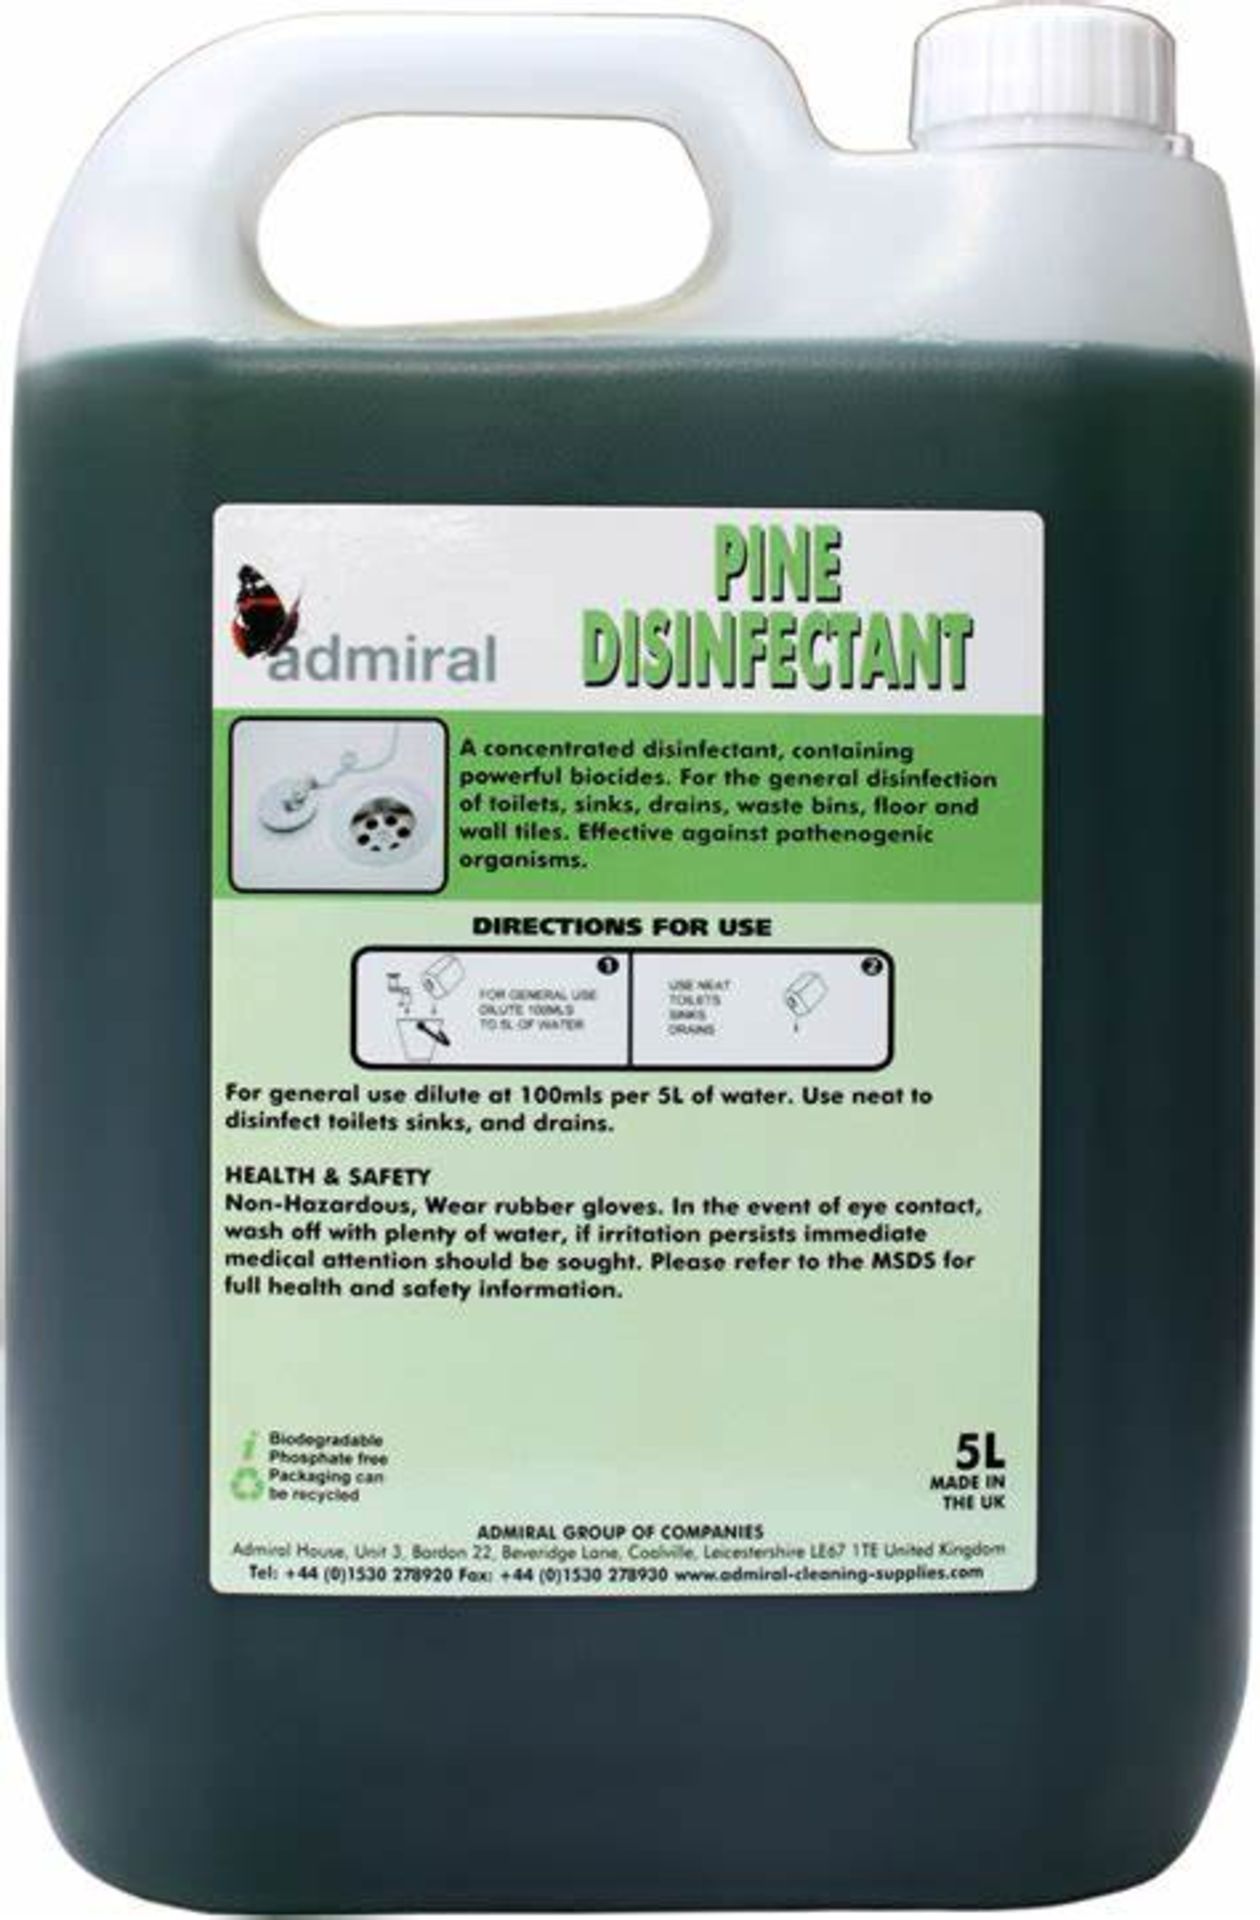 60 X BRAND NEW ADMIRAL PROFESSIONAL 1L PINE DISINFECTANT R9-3